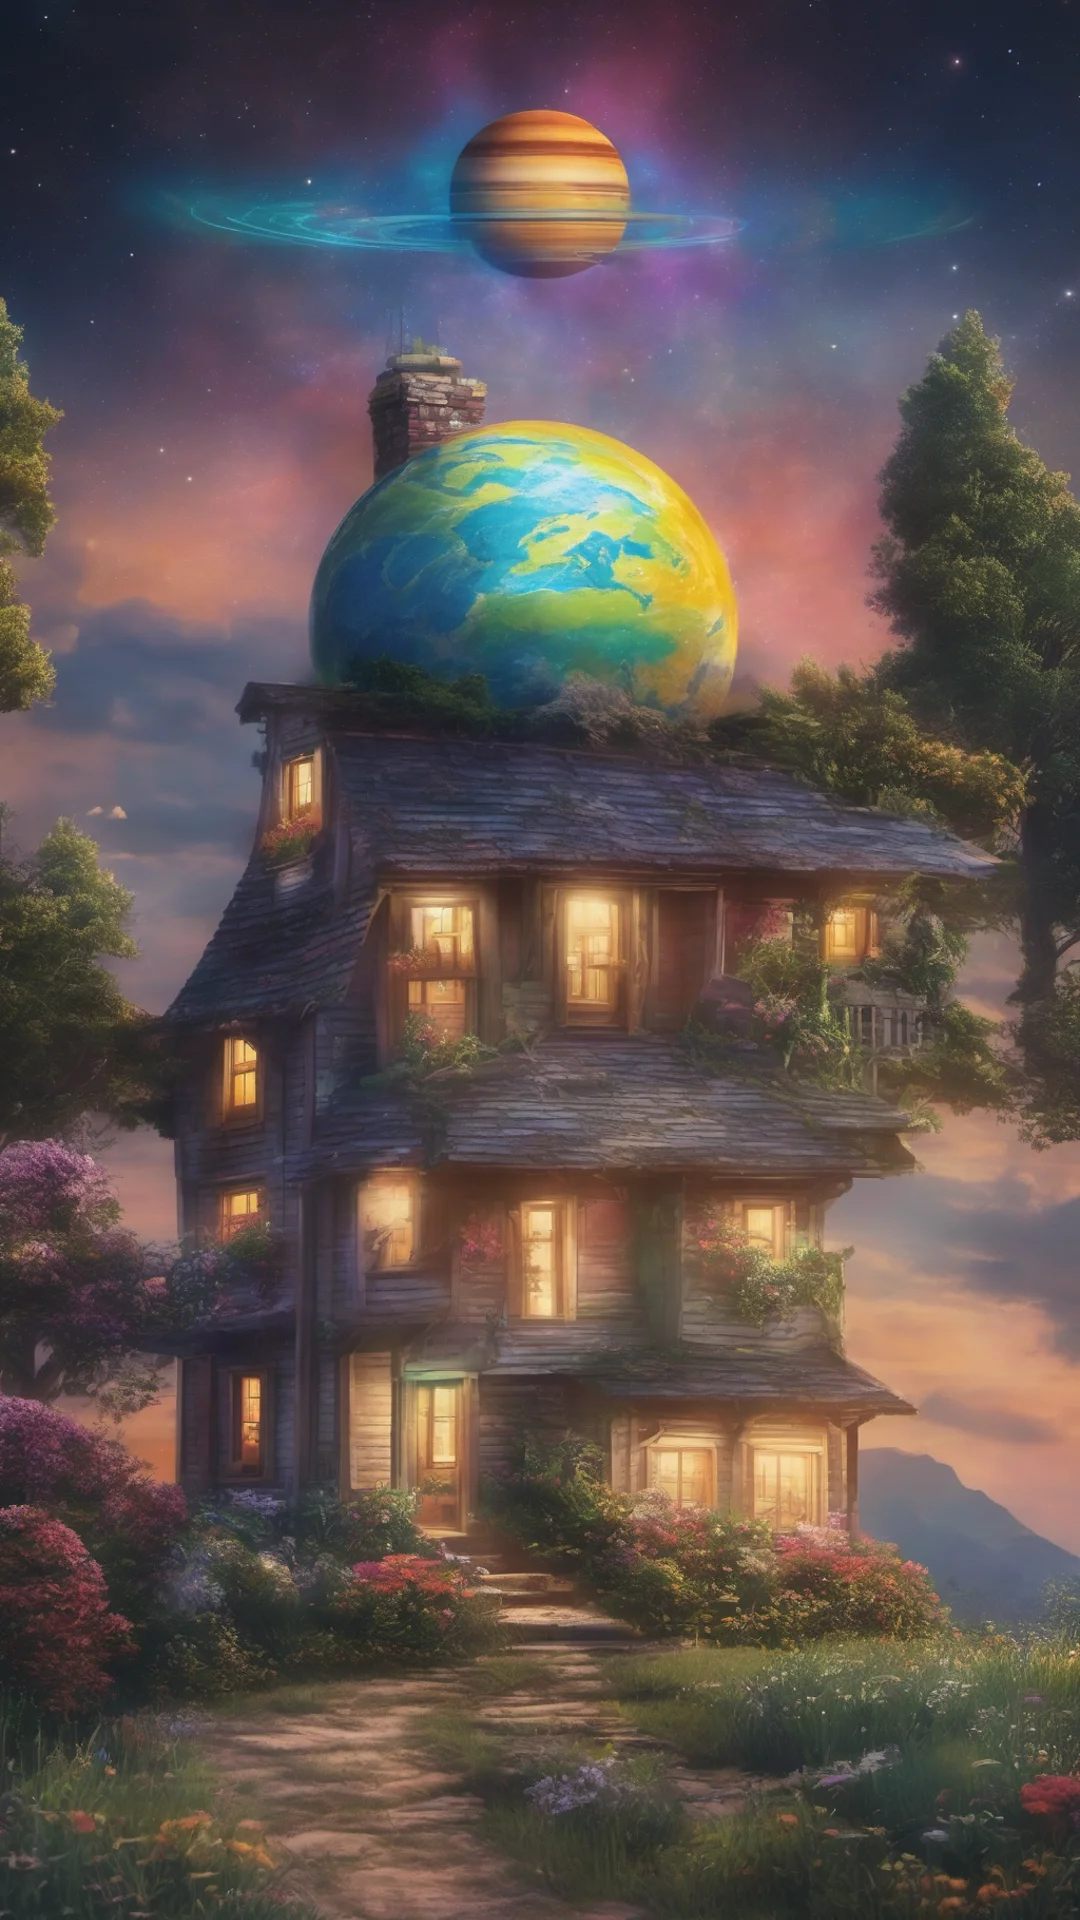 cottage with colorful earth like glowing circle planet with saturn rings at the top of the sky tall